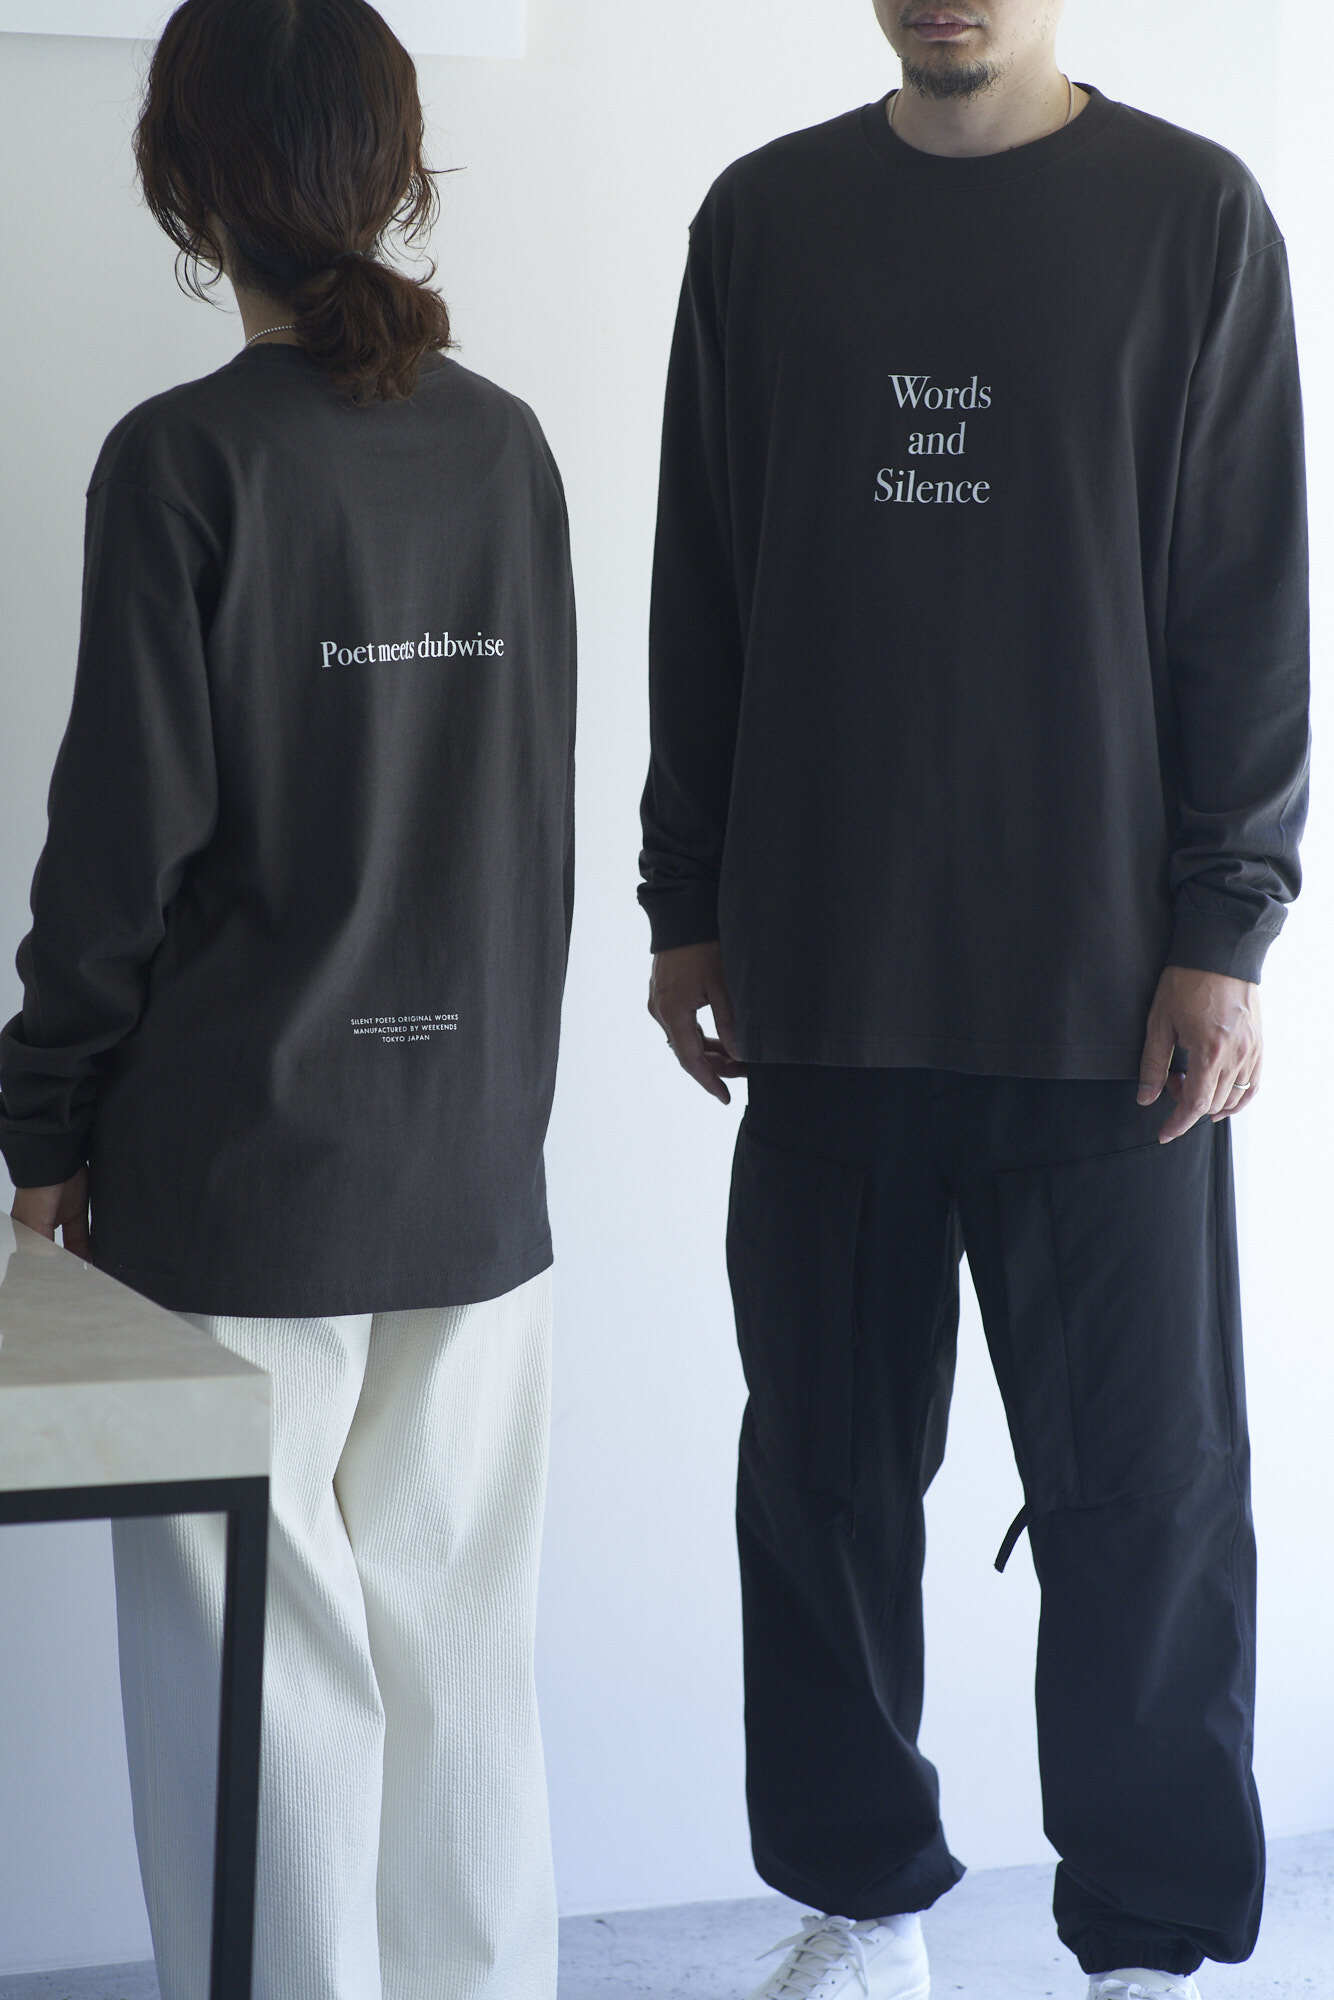 POET MEETS DUBWISE WORDS AND SILENCE L/S T-Shirt＜PEARL19別注＞ pearl19